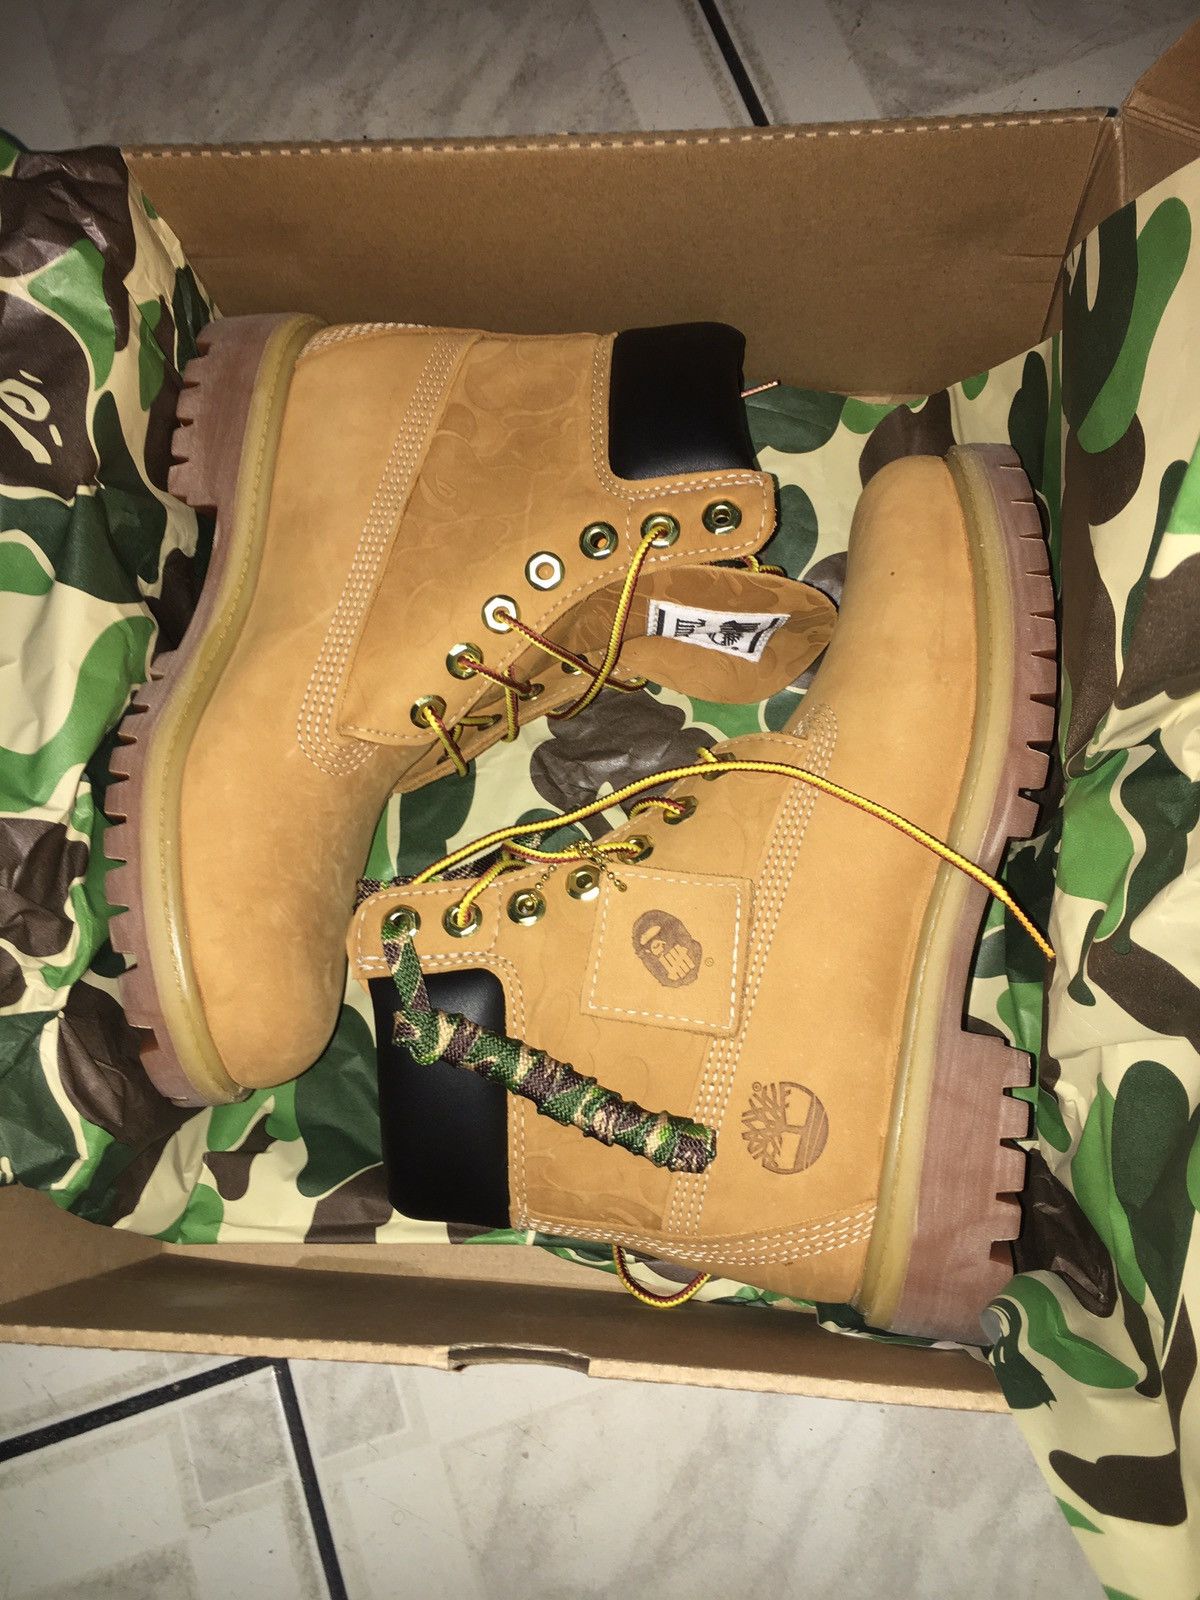 Undefeated X Bape X Timberland | Grailed